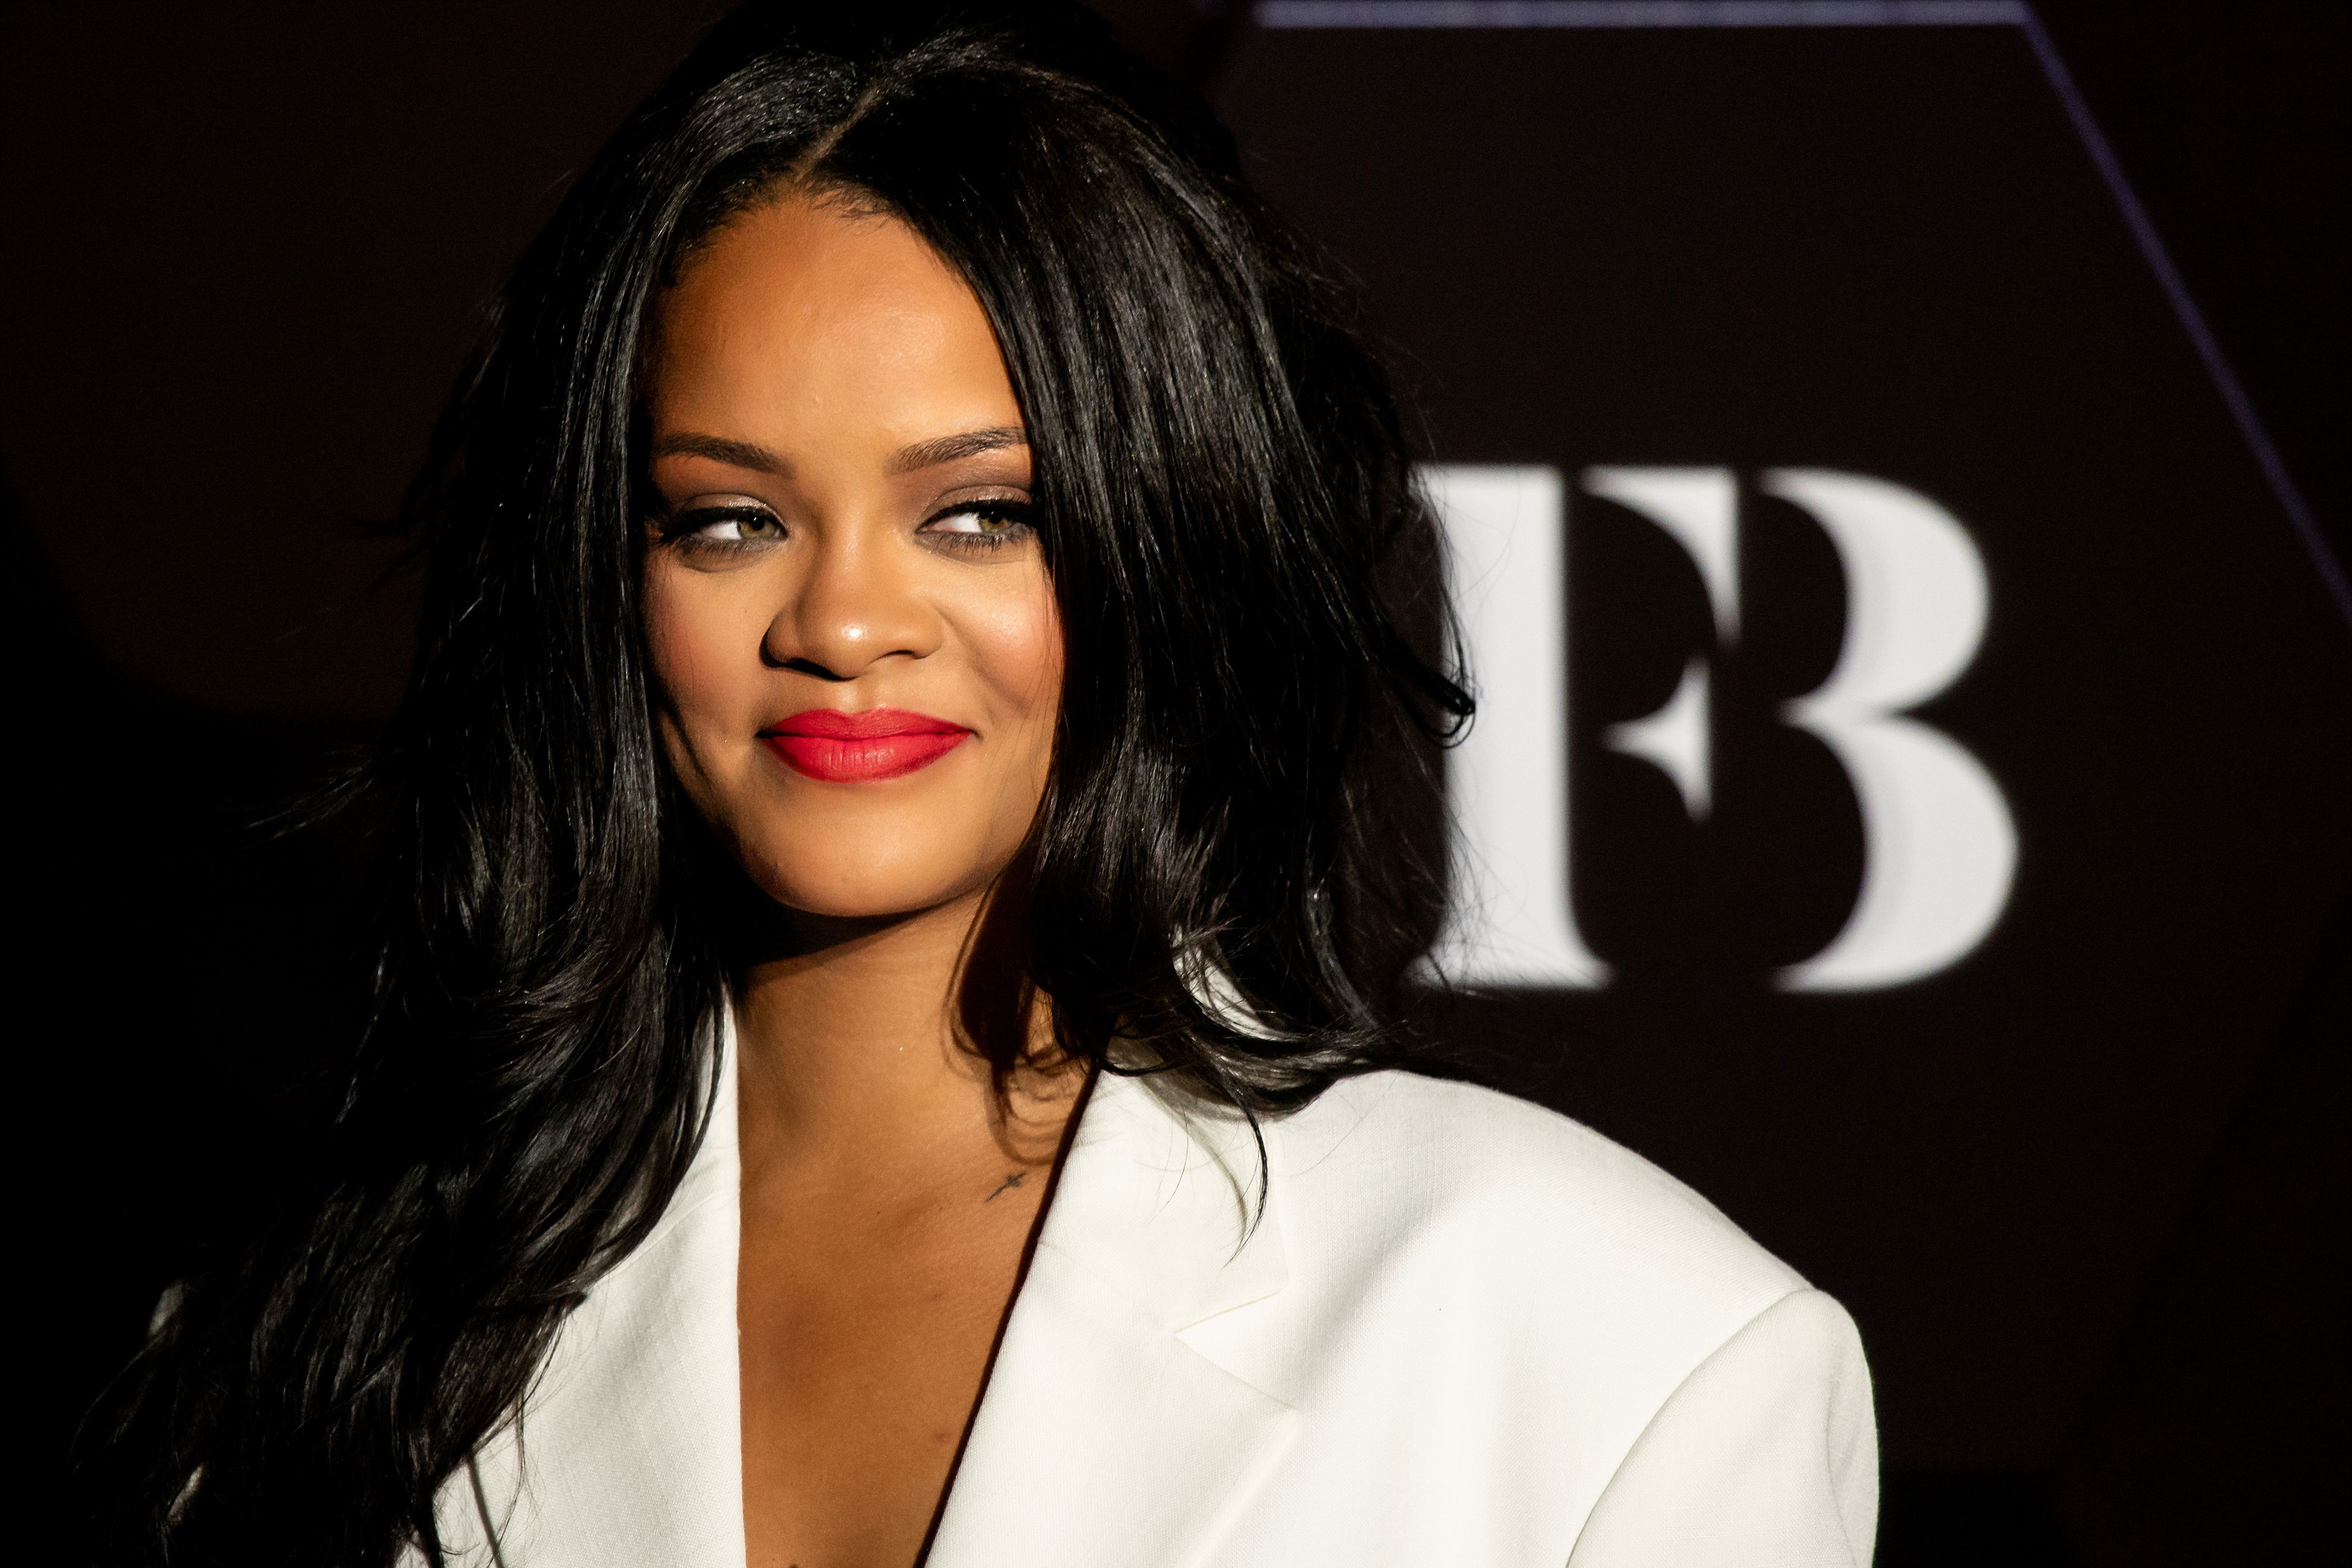 Rihanna Reportedly Working With LVMH to Launch Own High-End